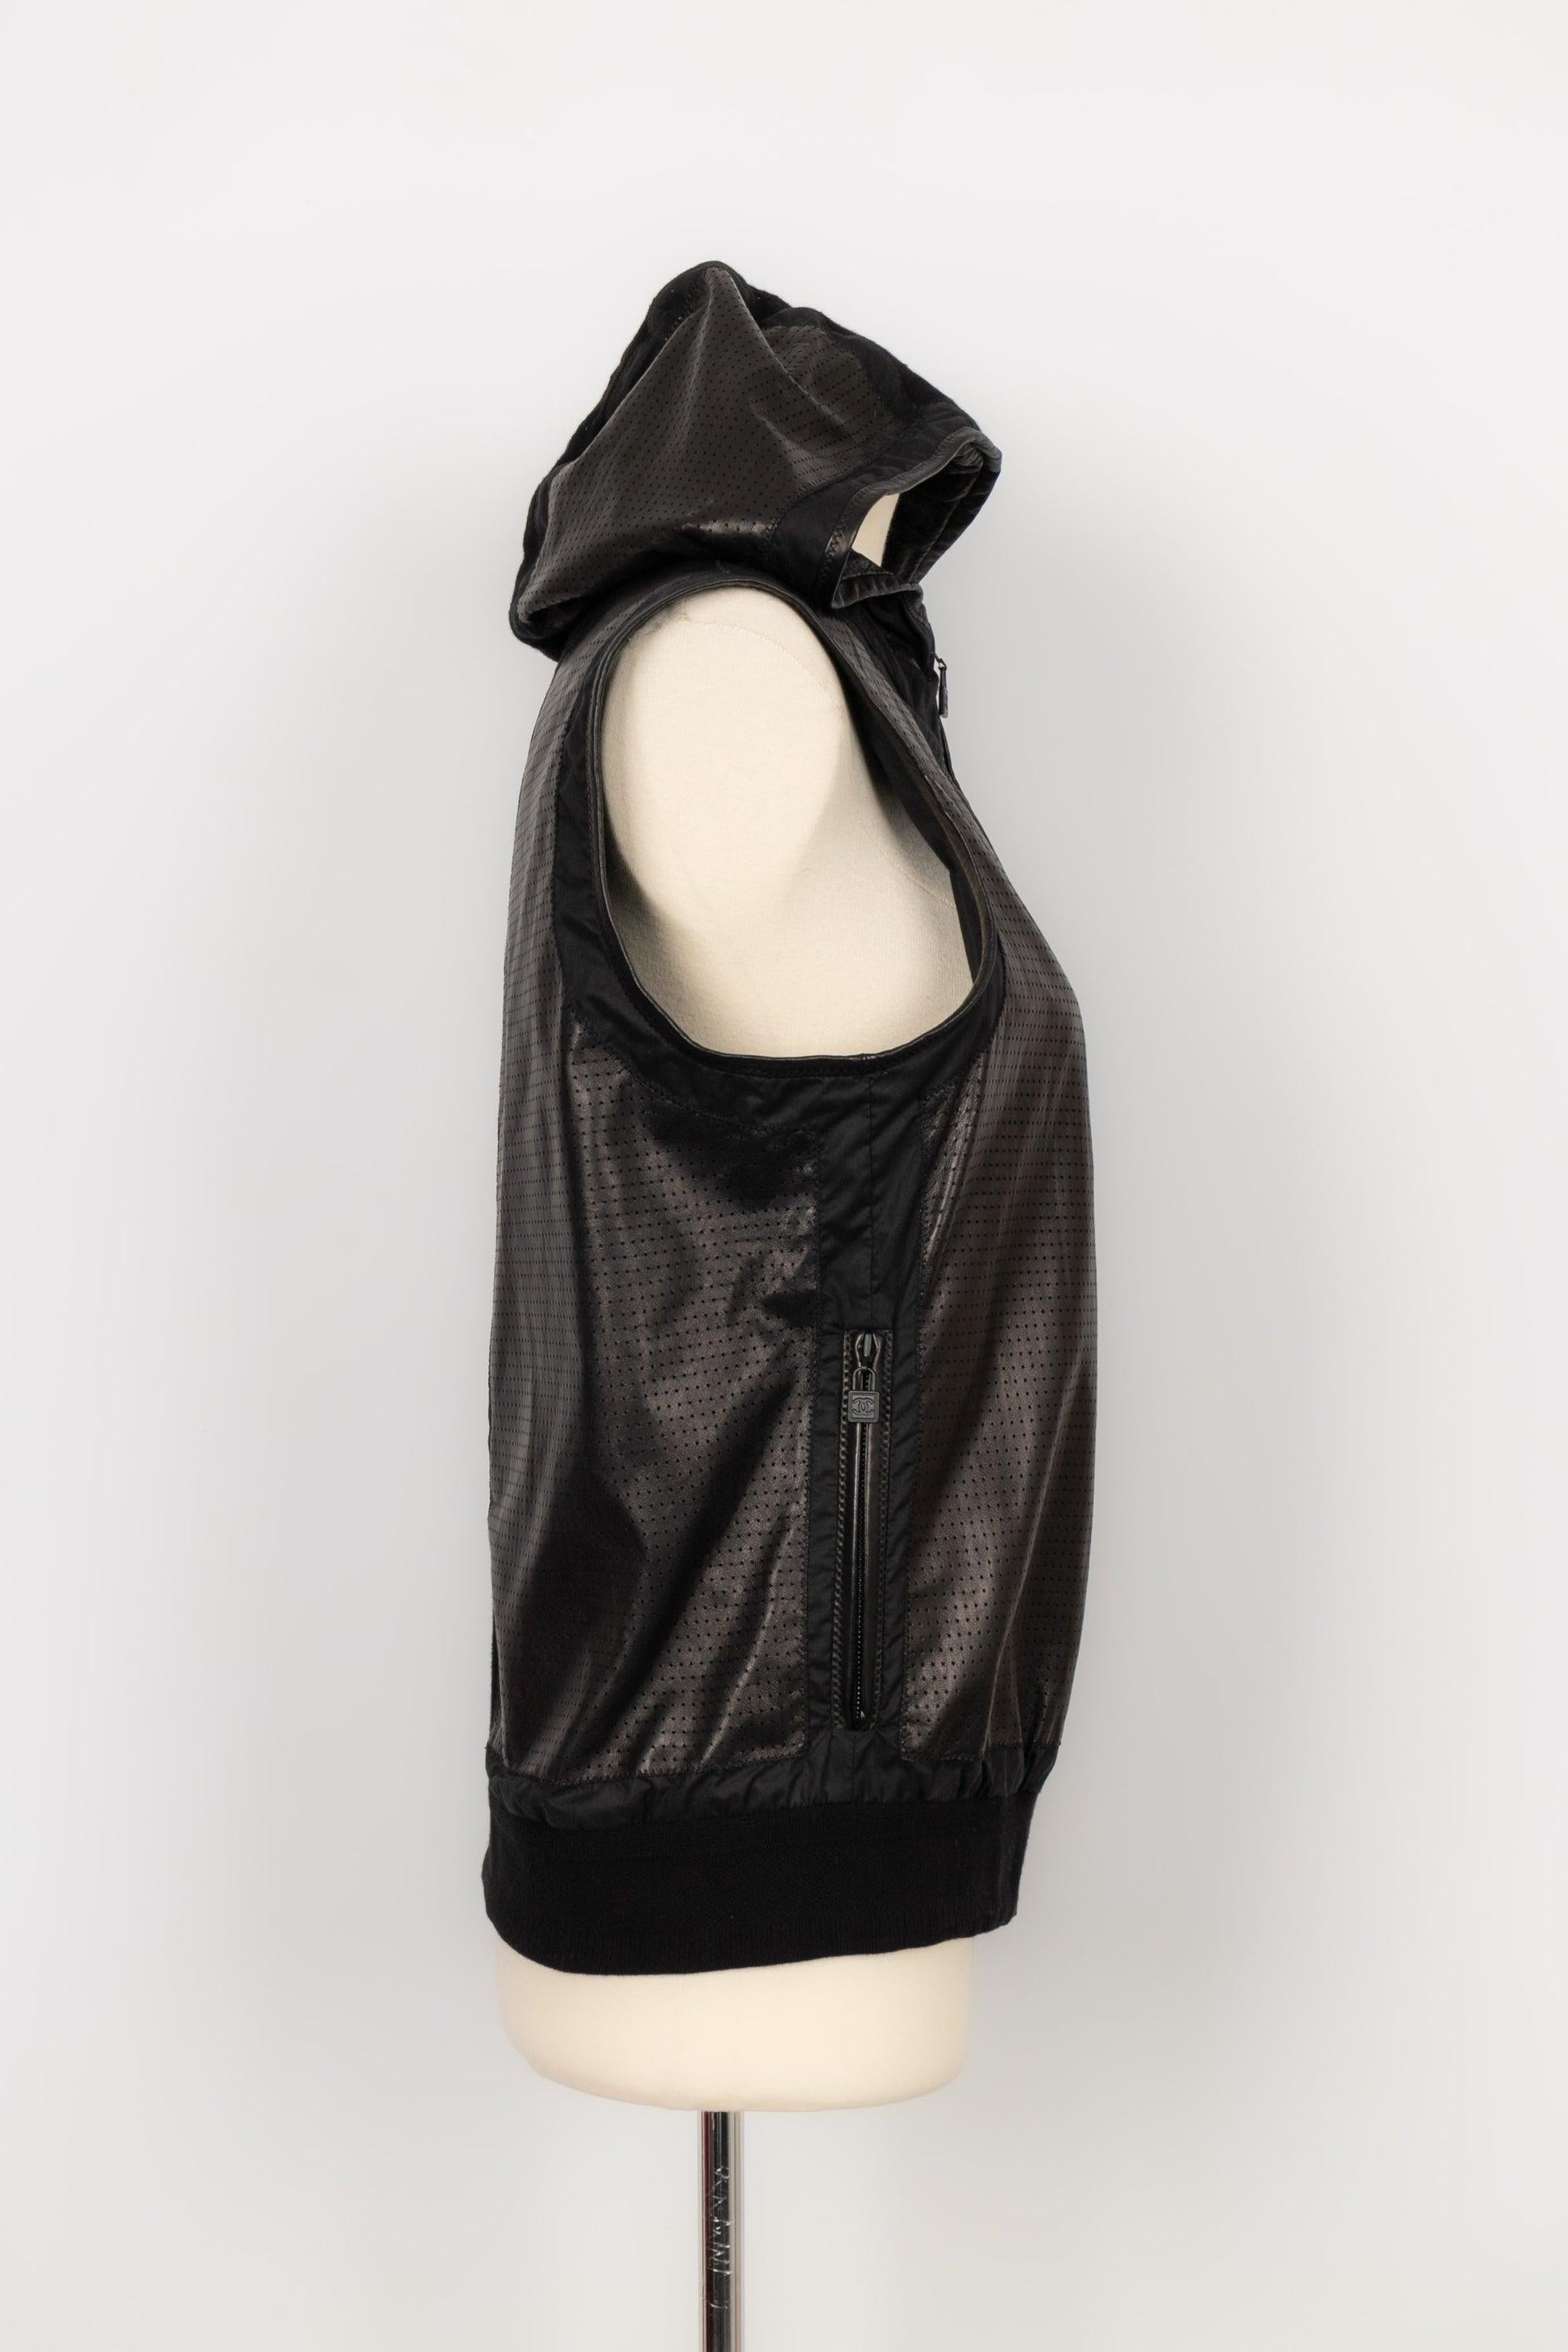 Chanel - Sleeveless hooded jacket. No size indicated, it fits a 36FR/38FR.

Additional information:
Condition: Very good condition
Dimensions: Chest: 46 cm - Length: 55 cm

Seller Reference: FV102
